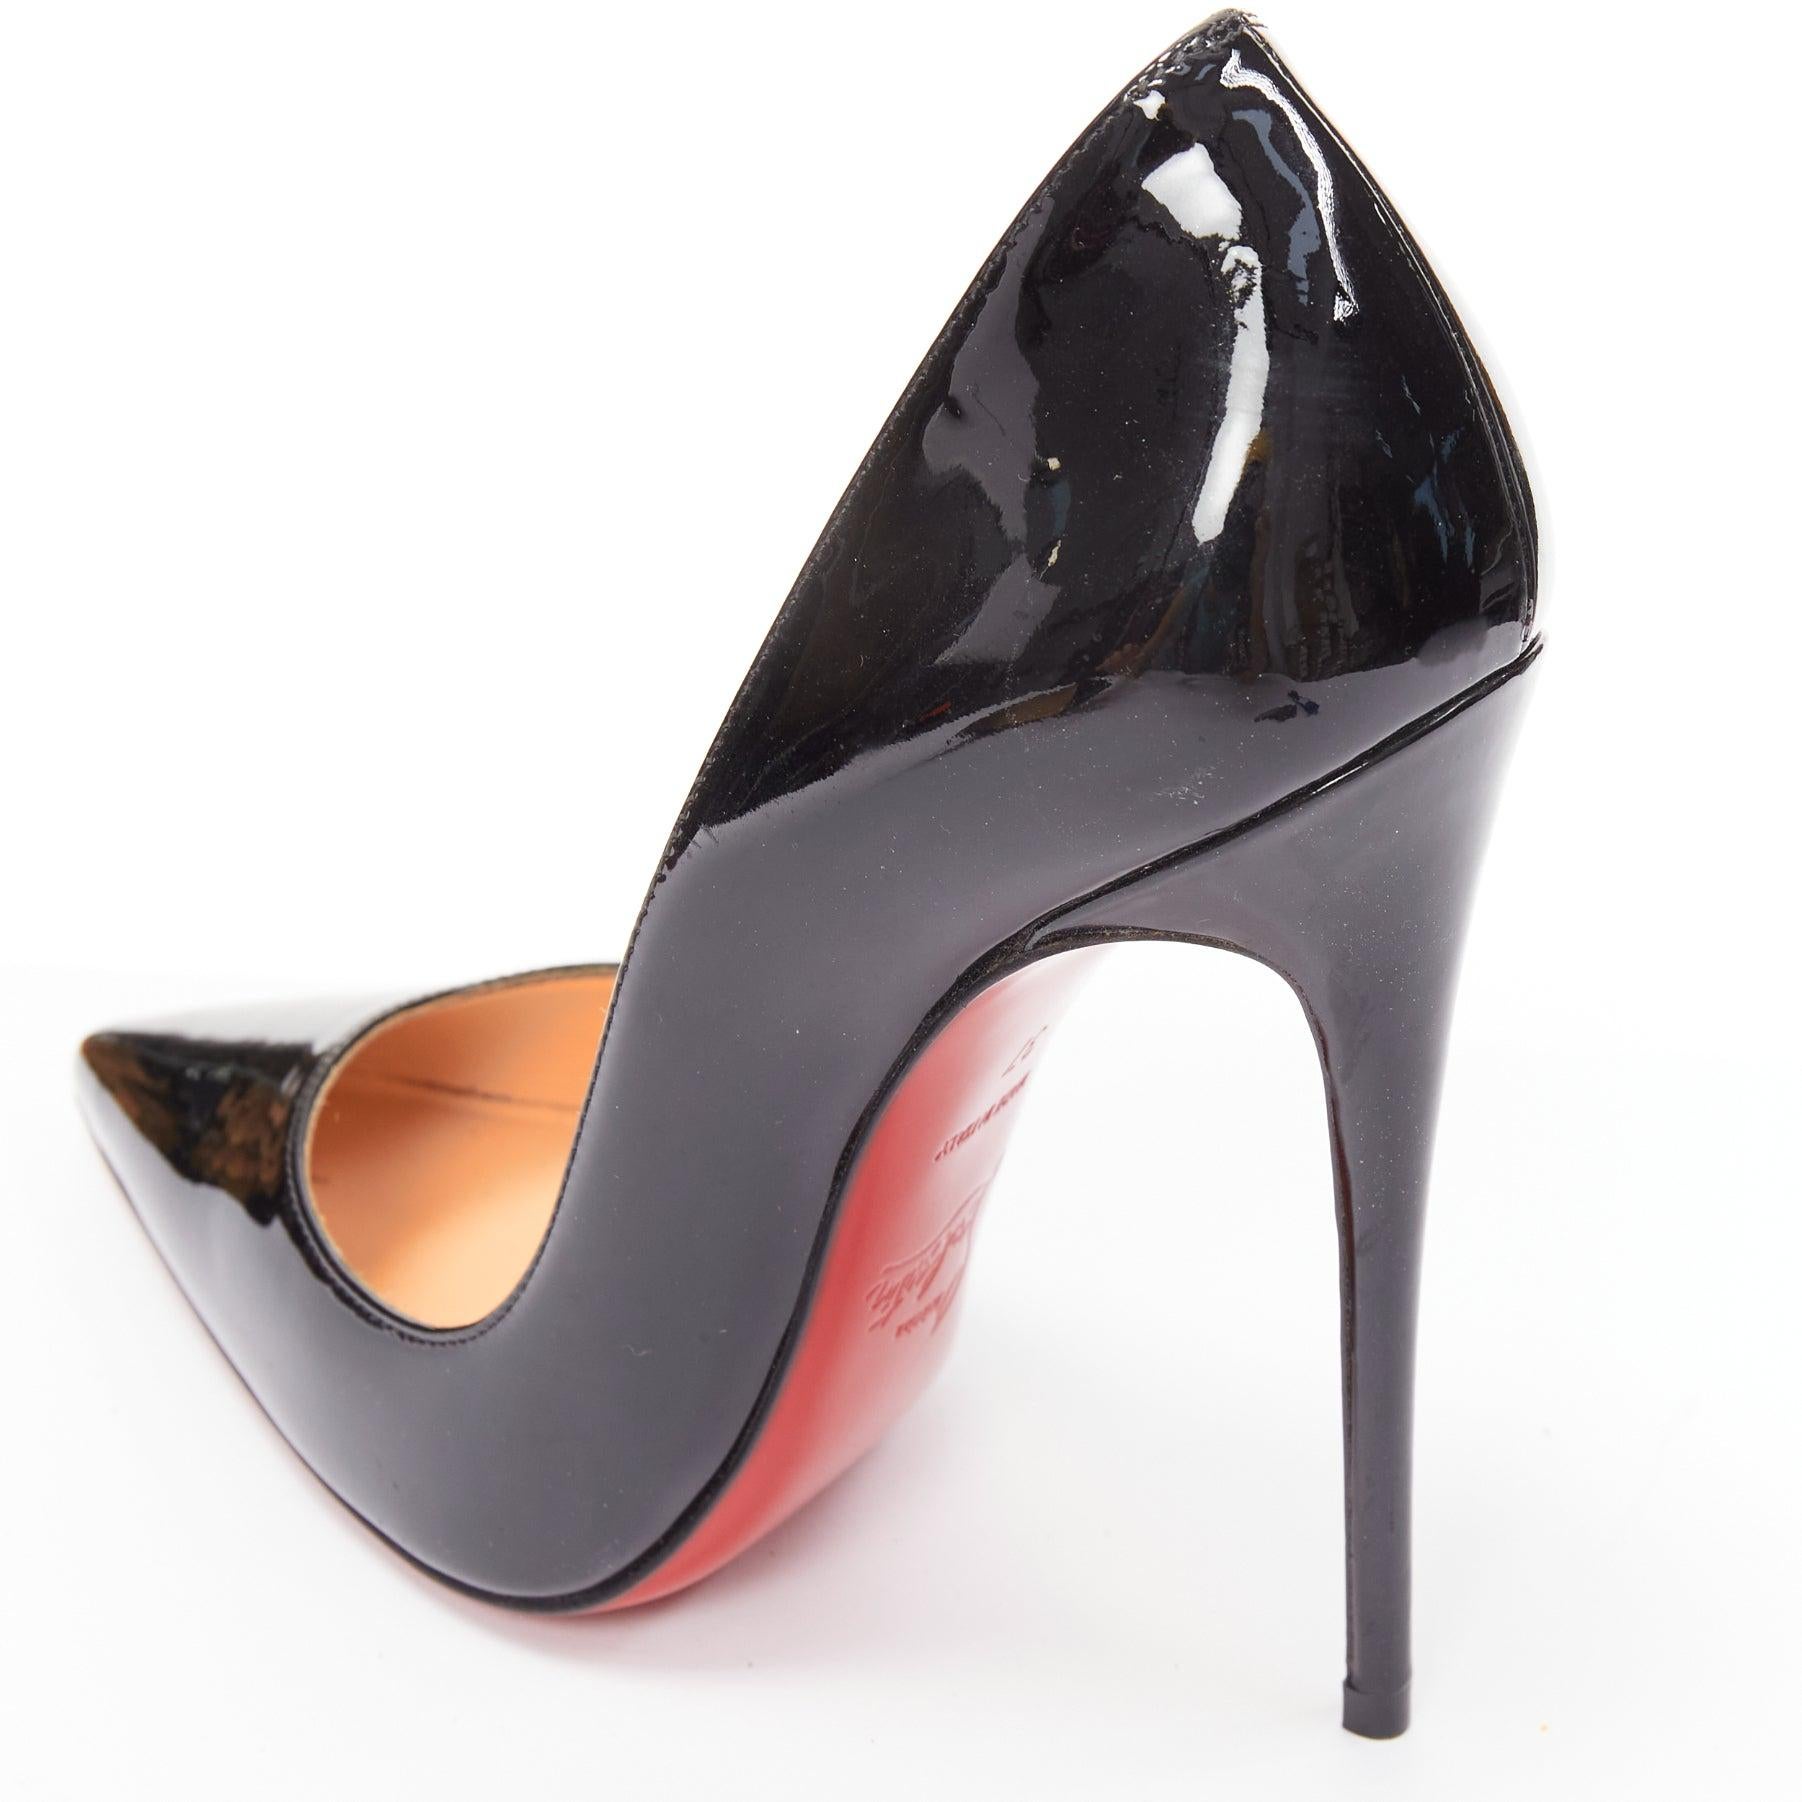 CHRISTIAN LOUBOUTIN So KAte 120 black patent leather point pigalle pump EU37 4